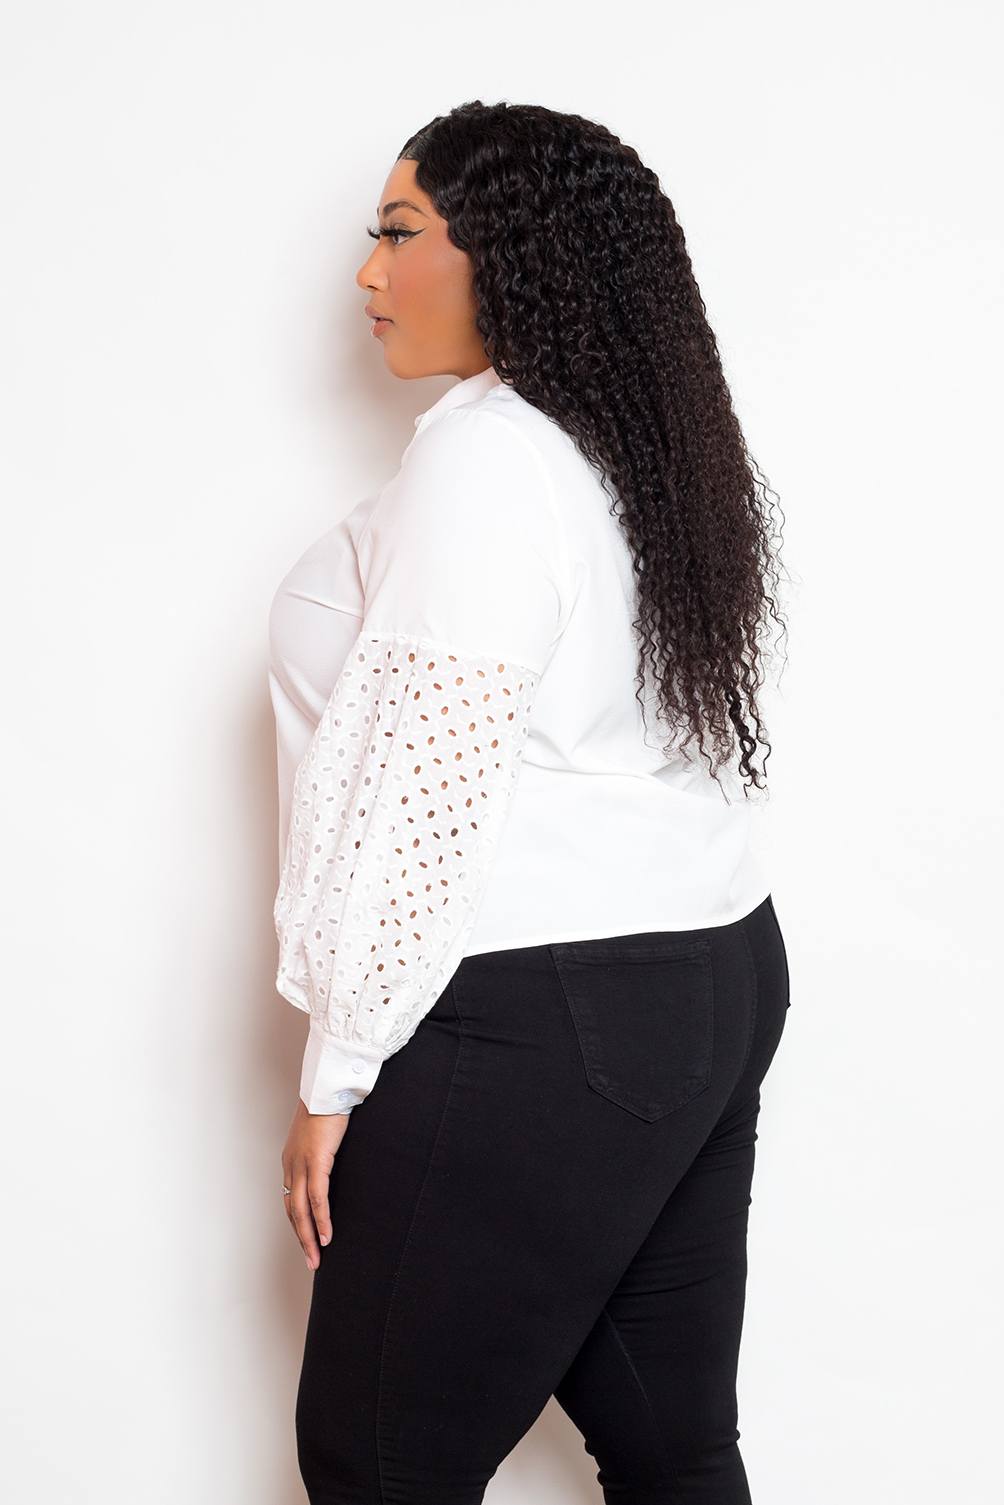 Blouse With Punched Sleeves | Black, PLUS SIZE, PLUS SIZE TOPS, SALE, SALE PLUS SIZE, White | Style Your Curves